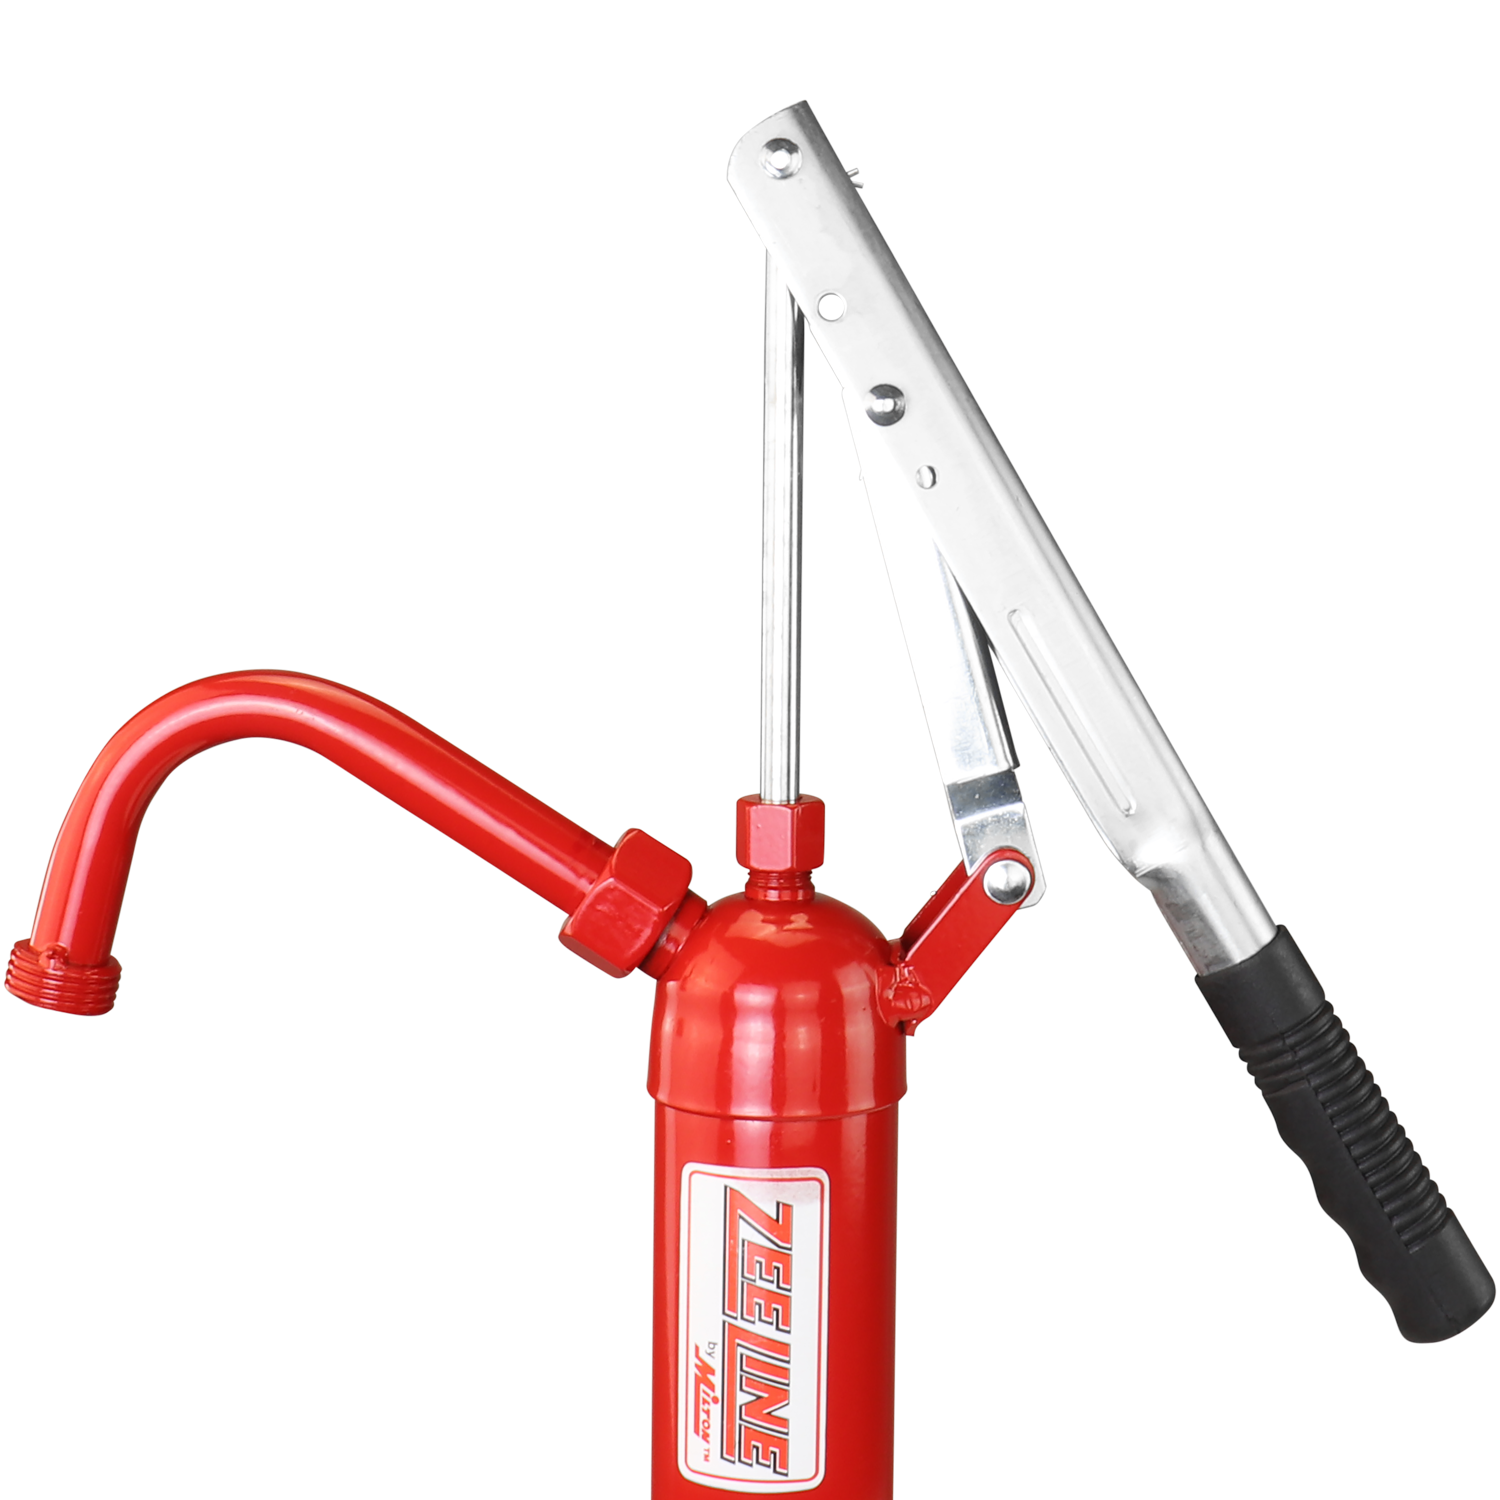 ZED-S - Hand Operated Lever Drum Pump with All Steel Body (1 Gallon Per 9 Strokes)